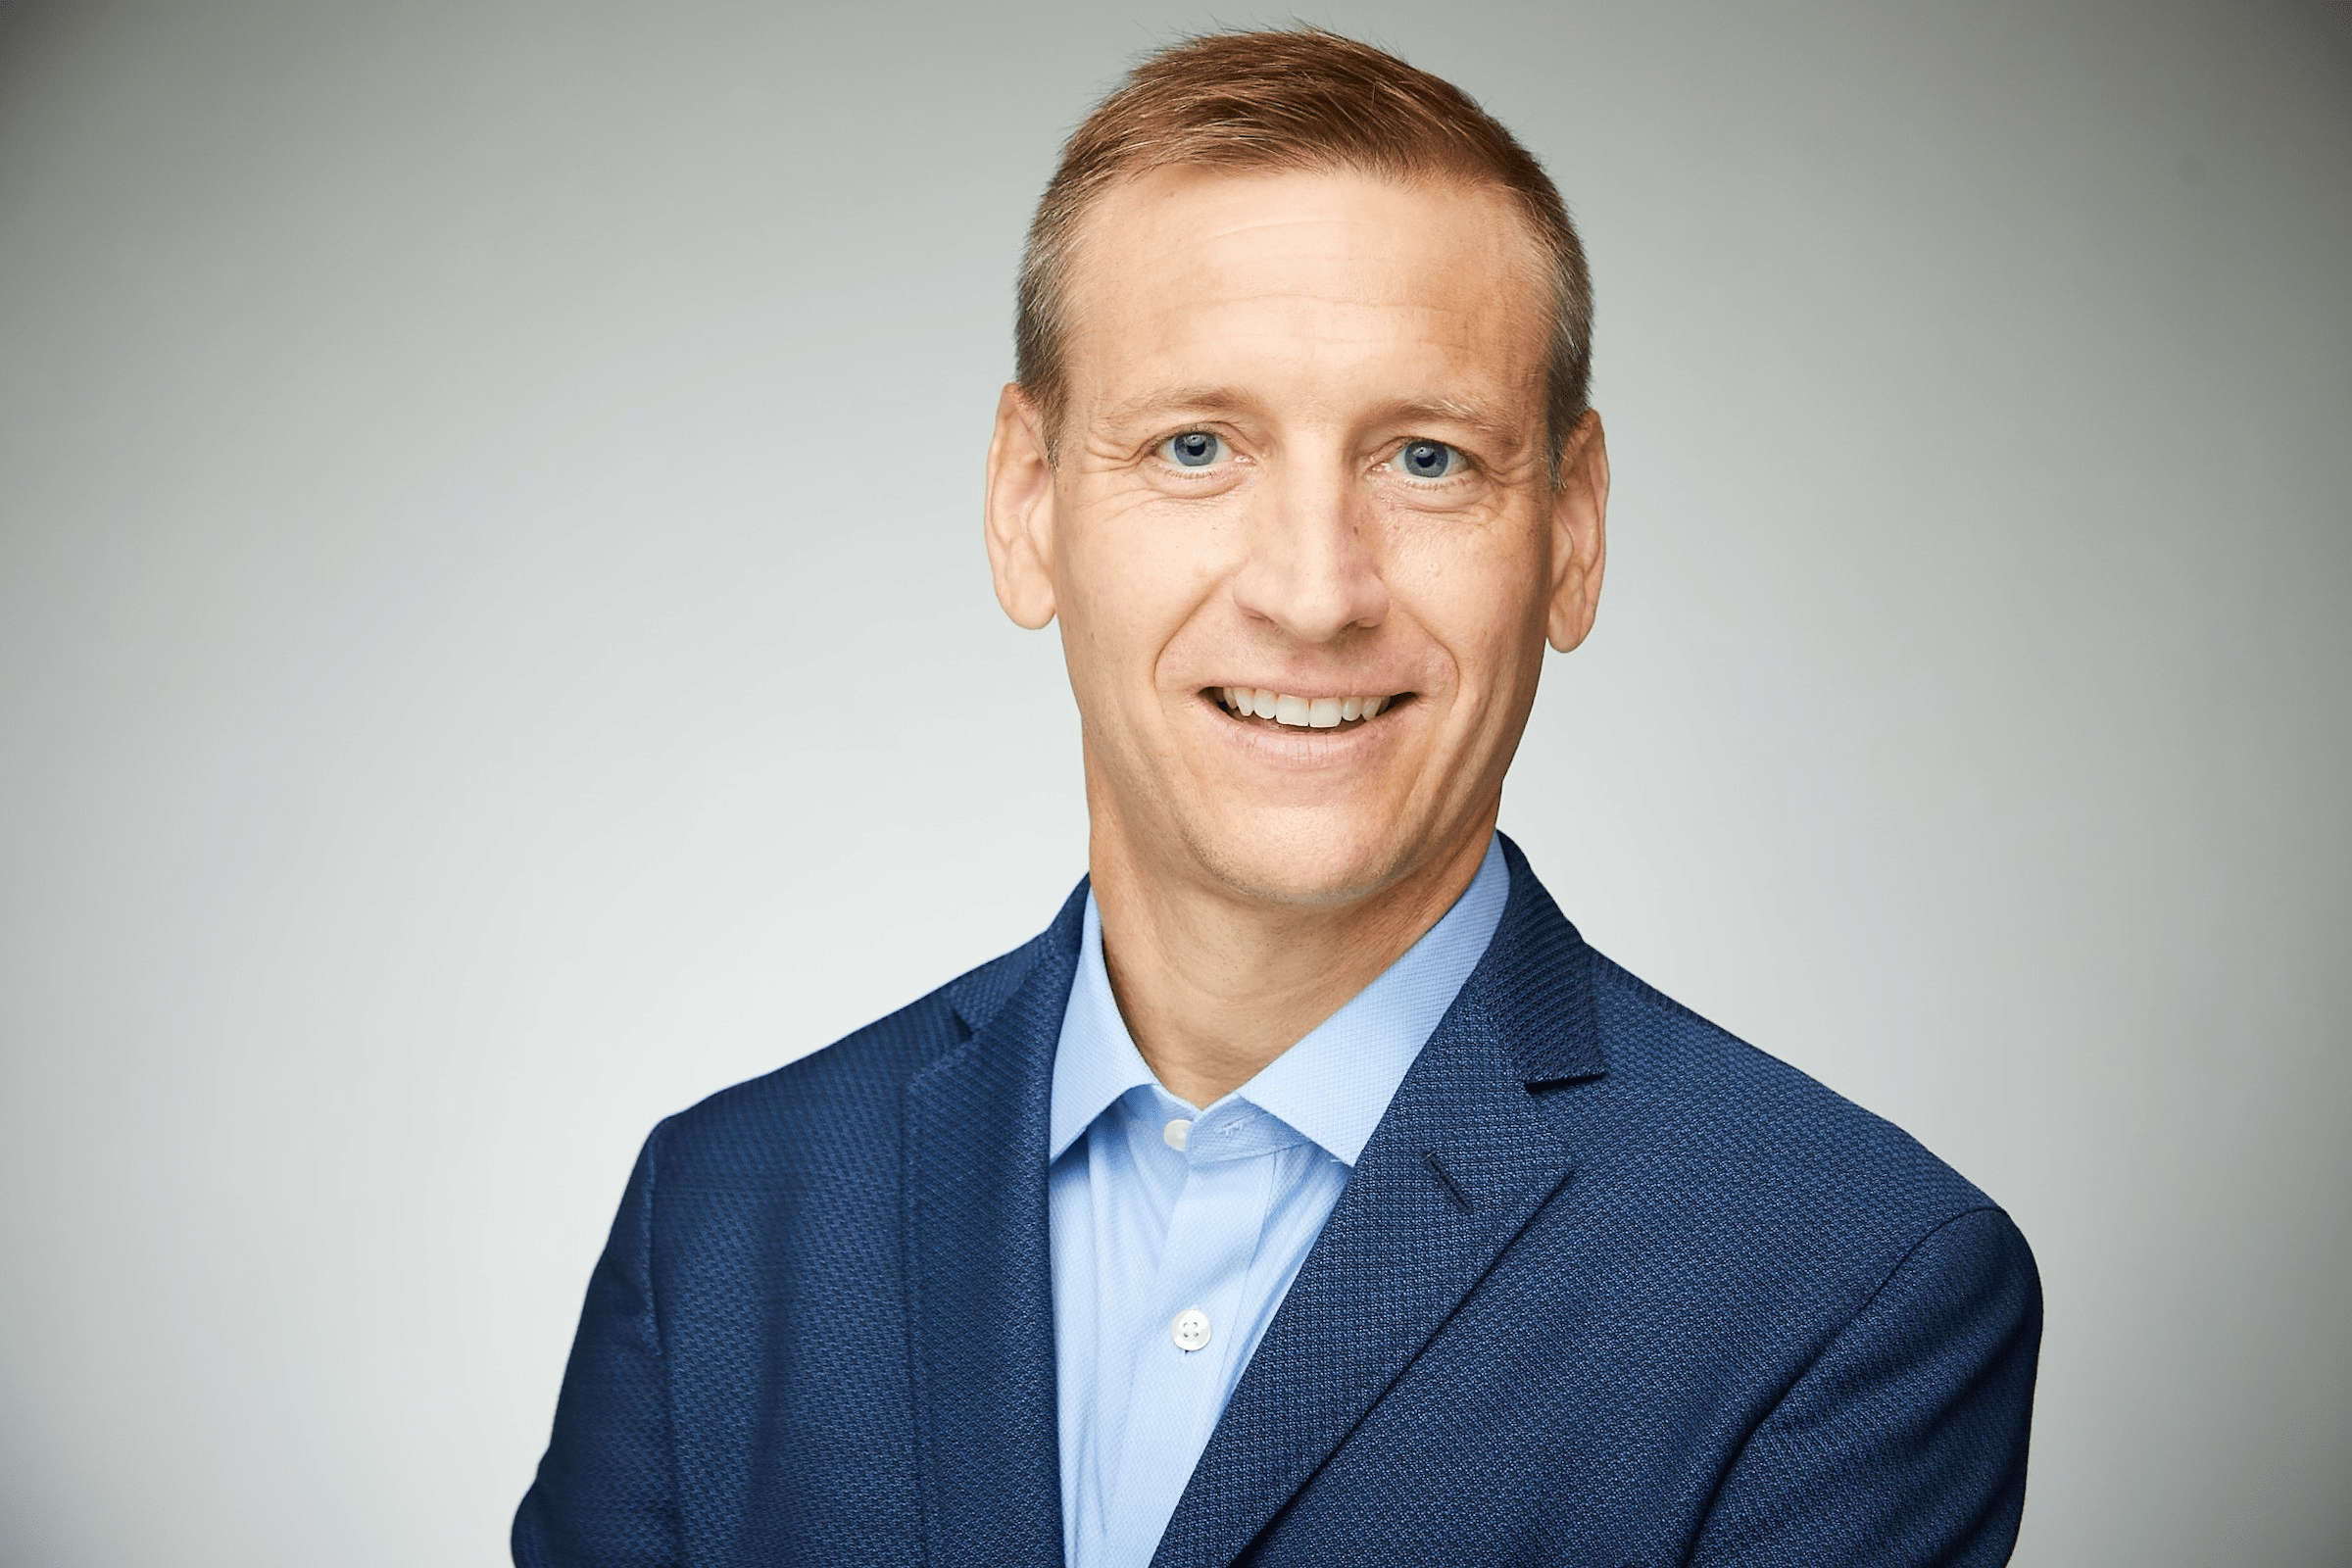 Odessa Appoints Fintech Veteran Nate Montgomery as Chief Revenue Officer to Drive Global Sales Expansion